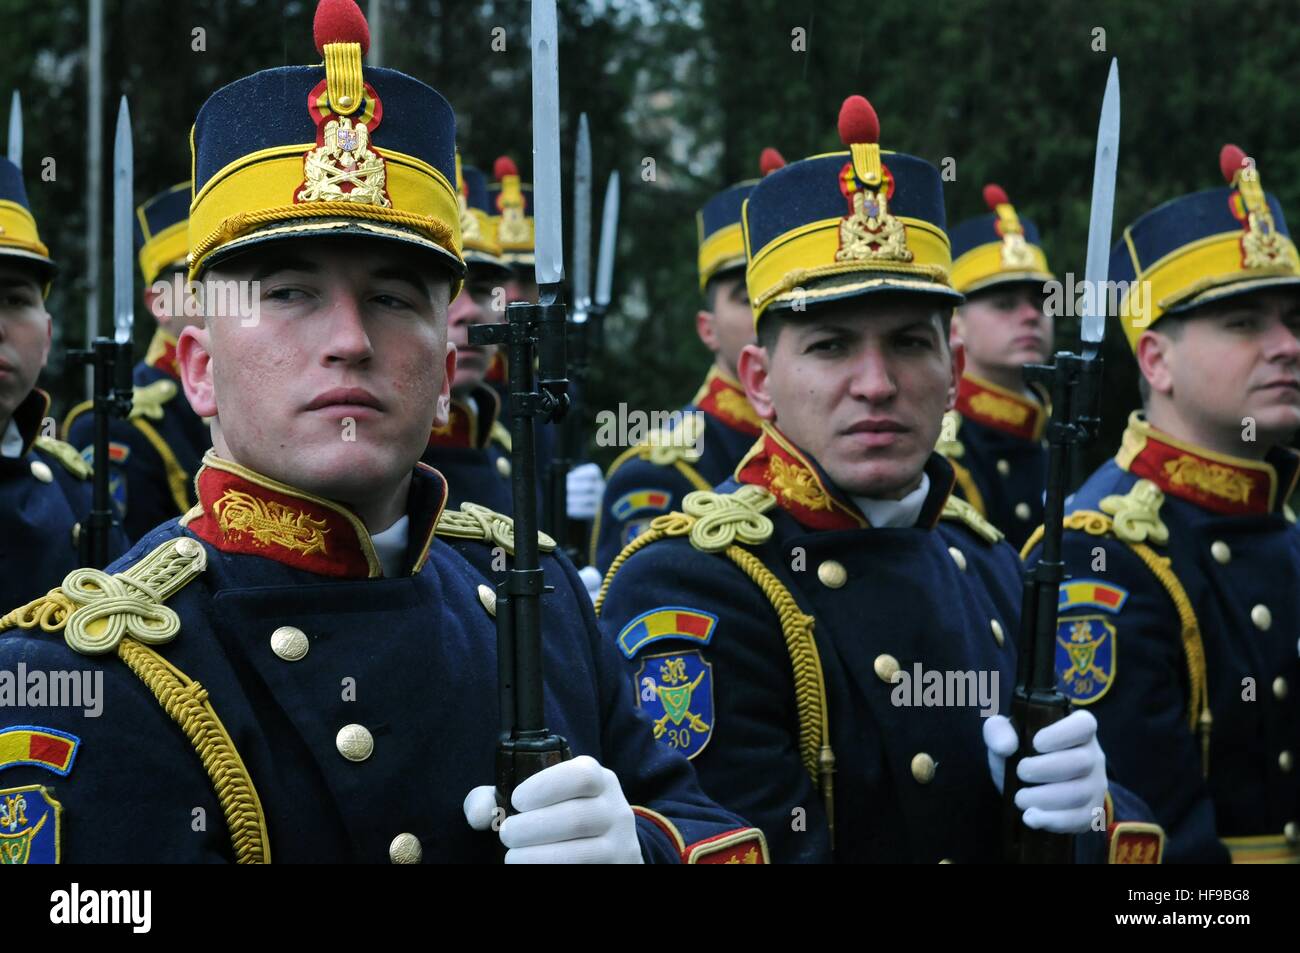 Romanian Honor Guard soldiers stand at attention during a visit from U.S. Army General Frank Grass November 27, 2015 in Bucharest, Romania. Stock Photo